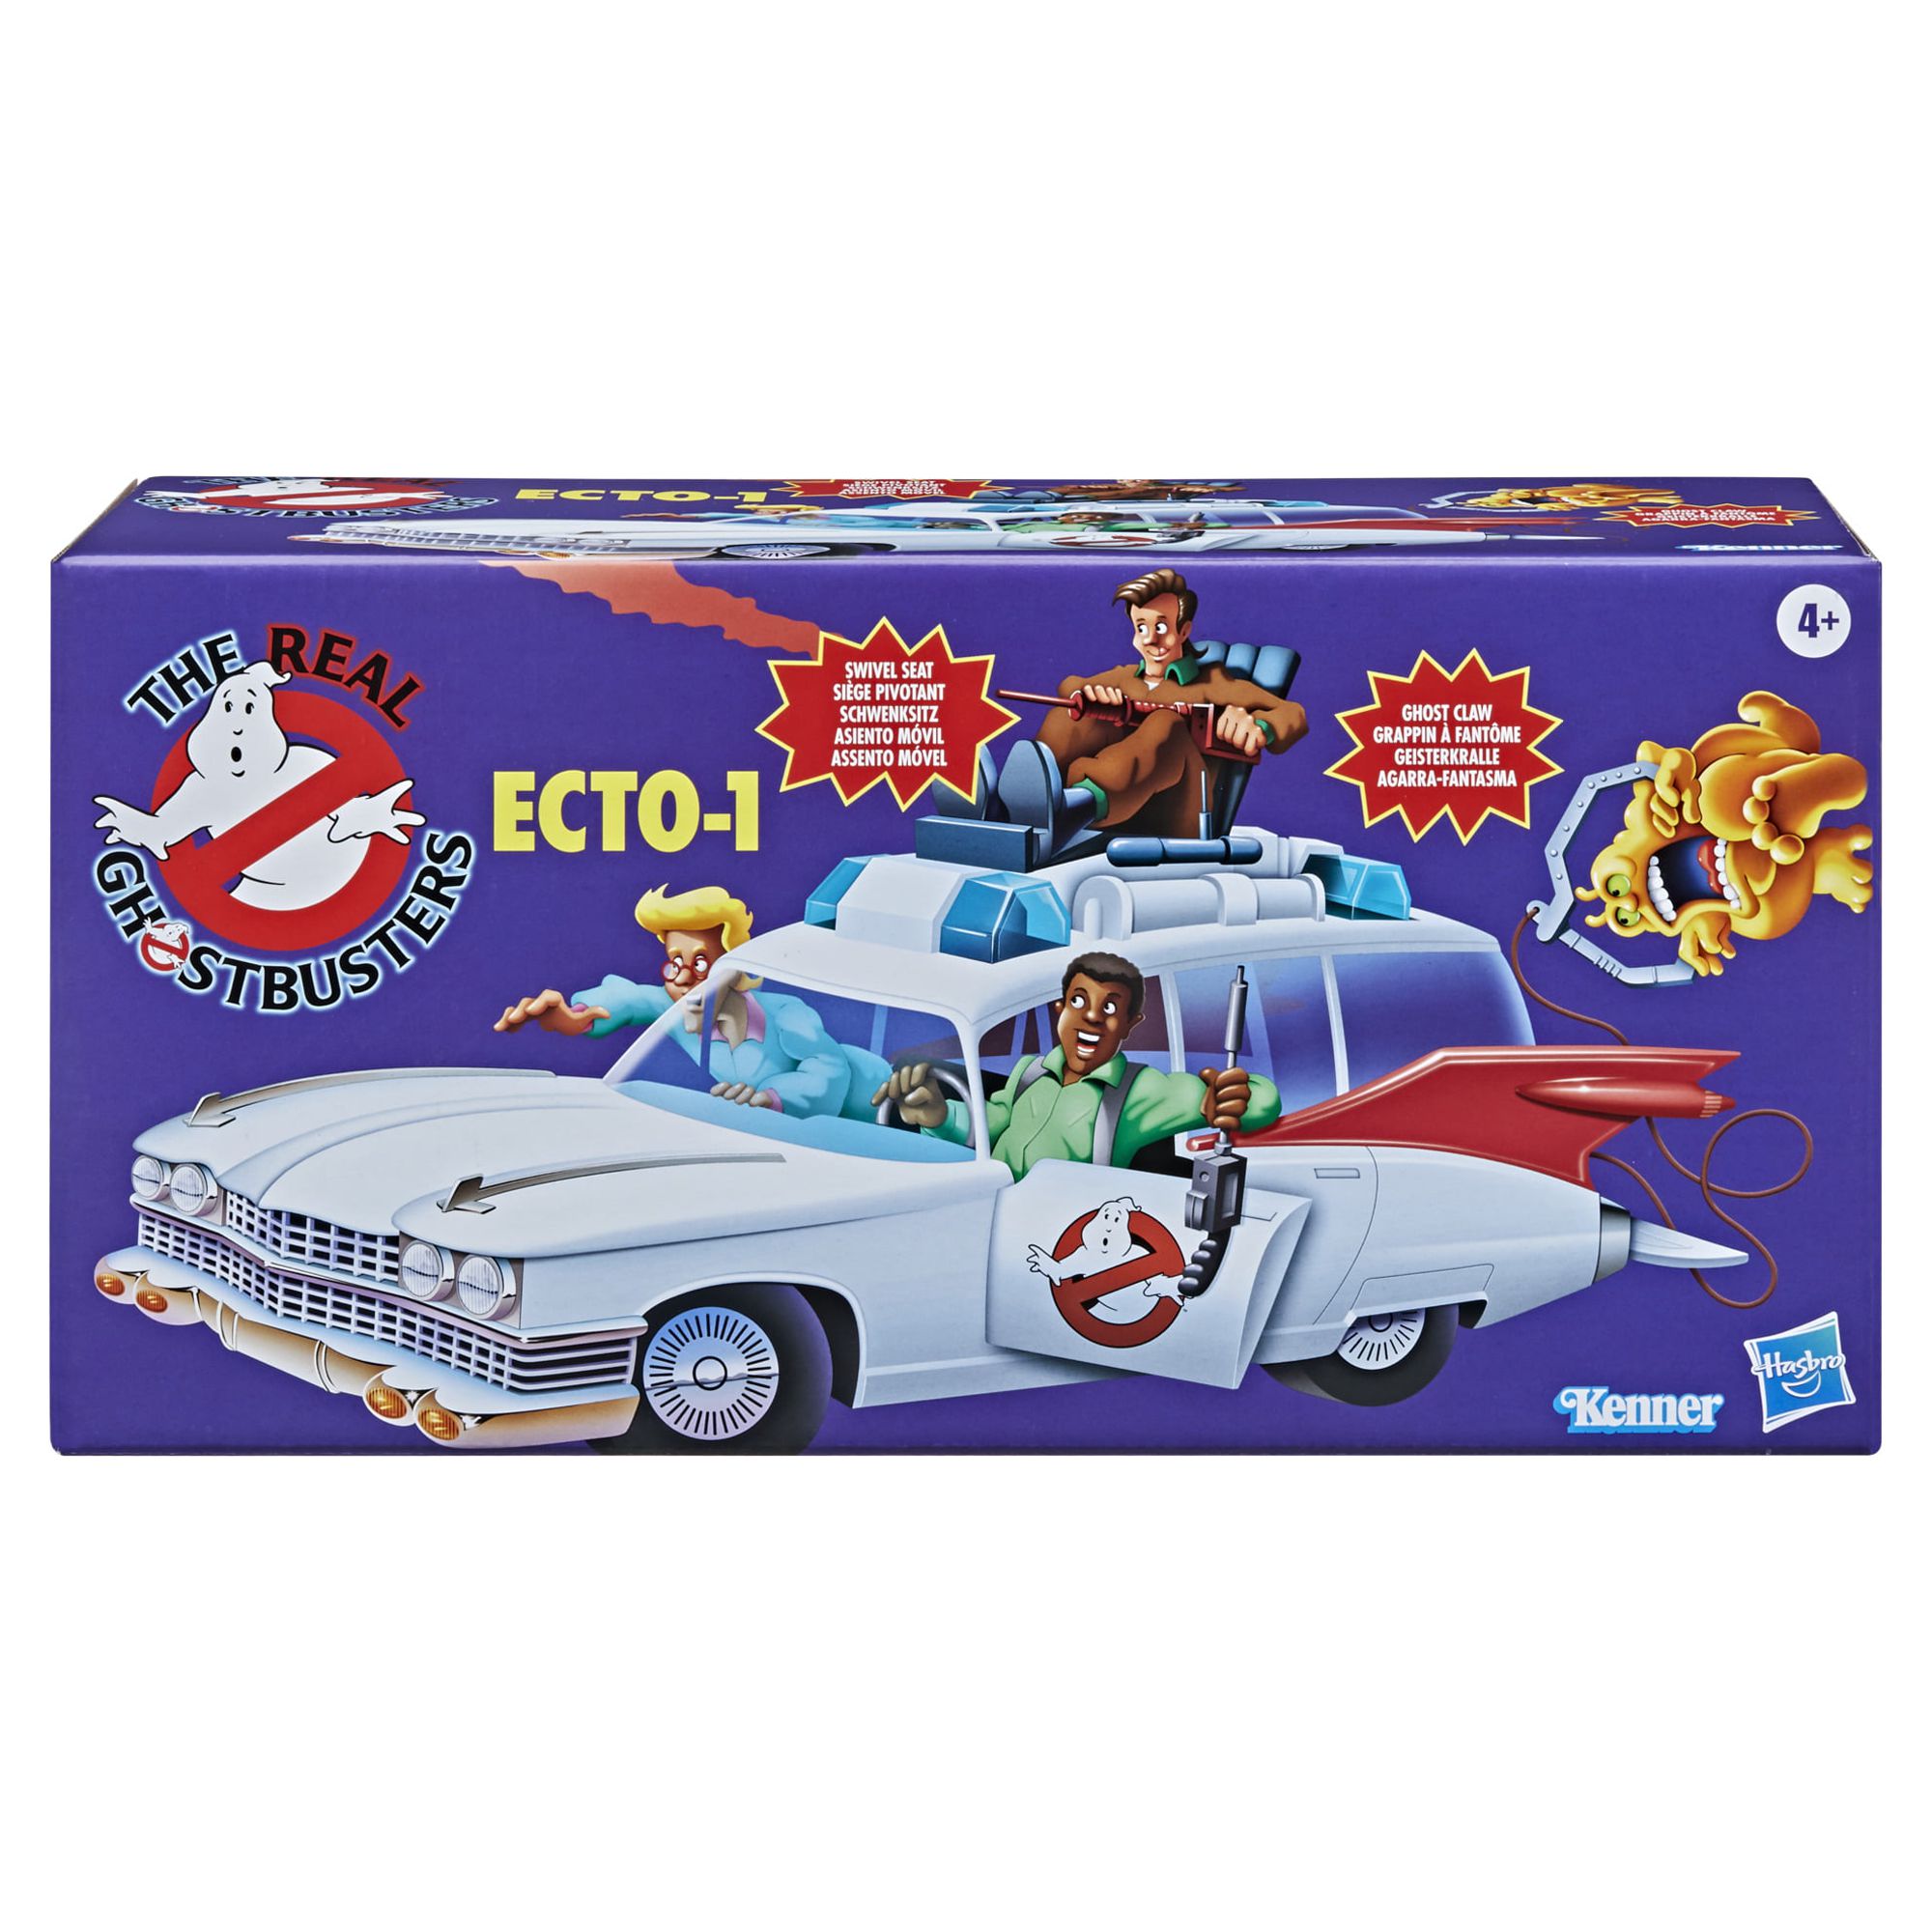 Ghostbusters Kenner Classics the Real Ghostbusters Ecto-1 Retro Vehicle - image 2 of 6